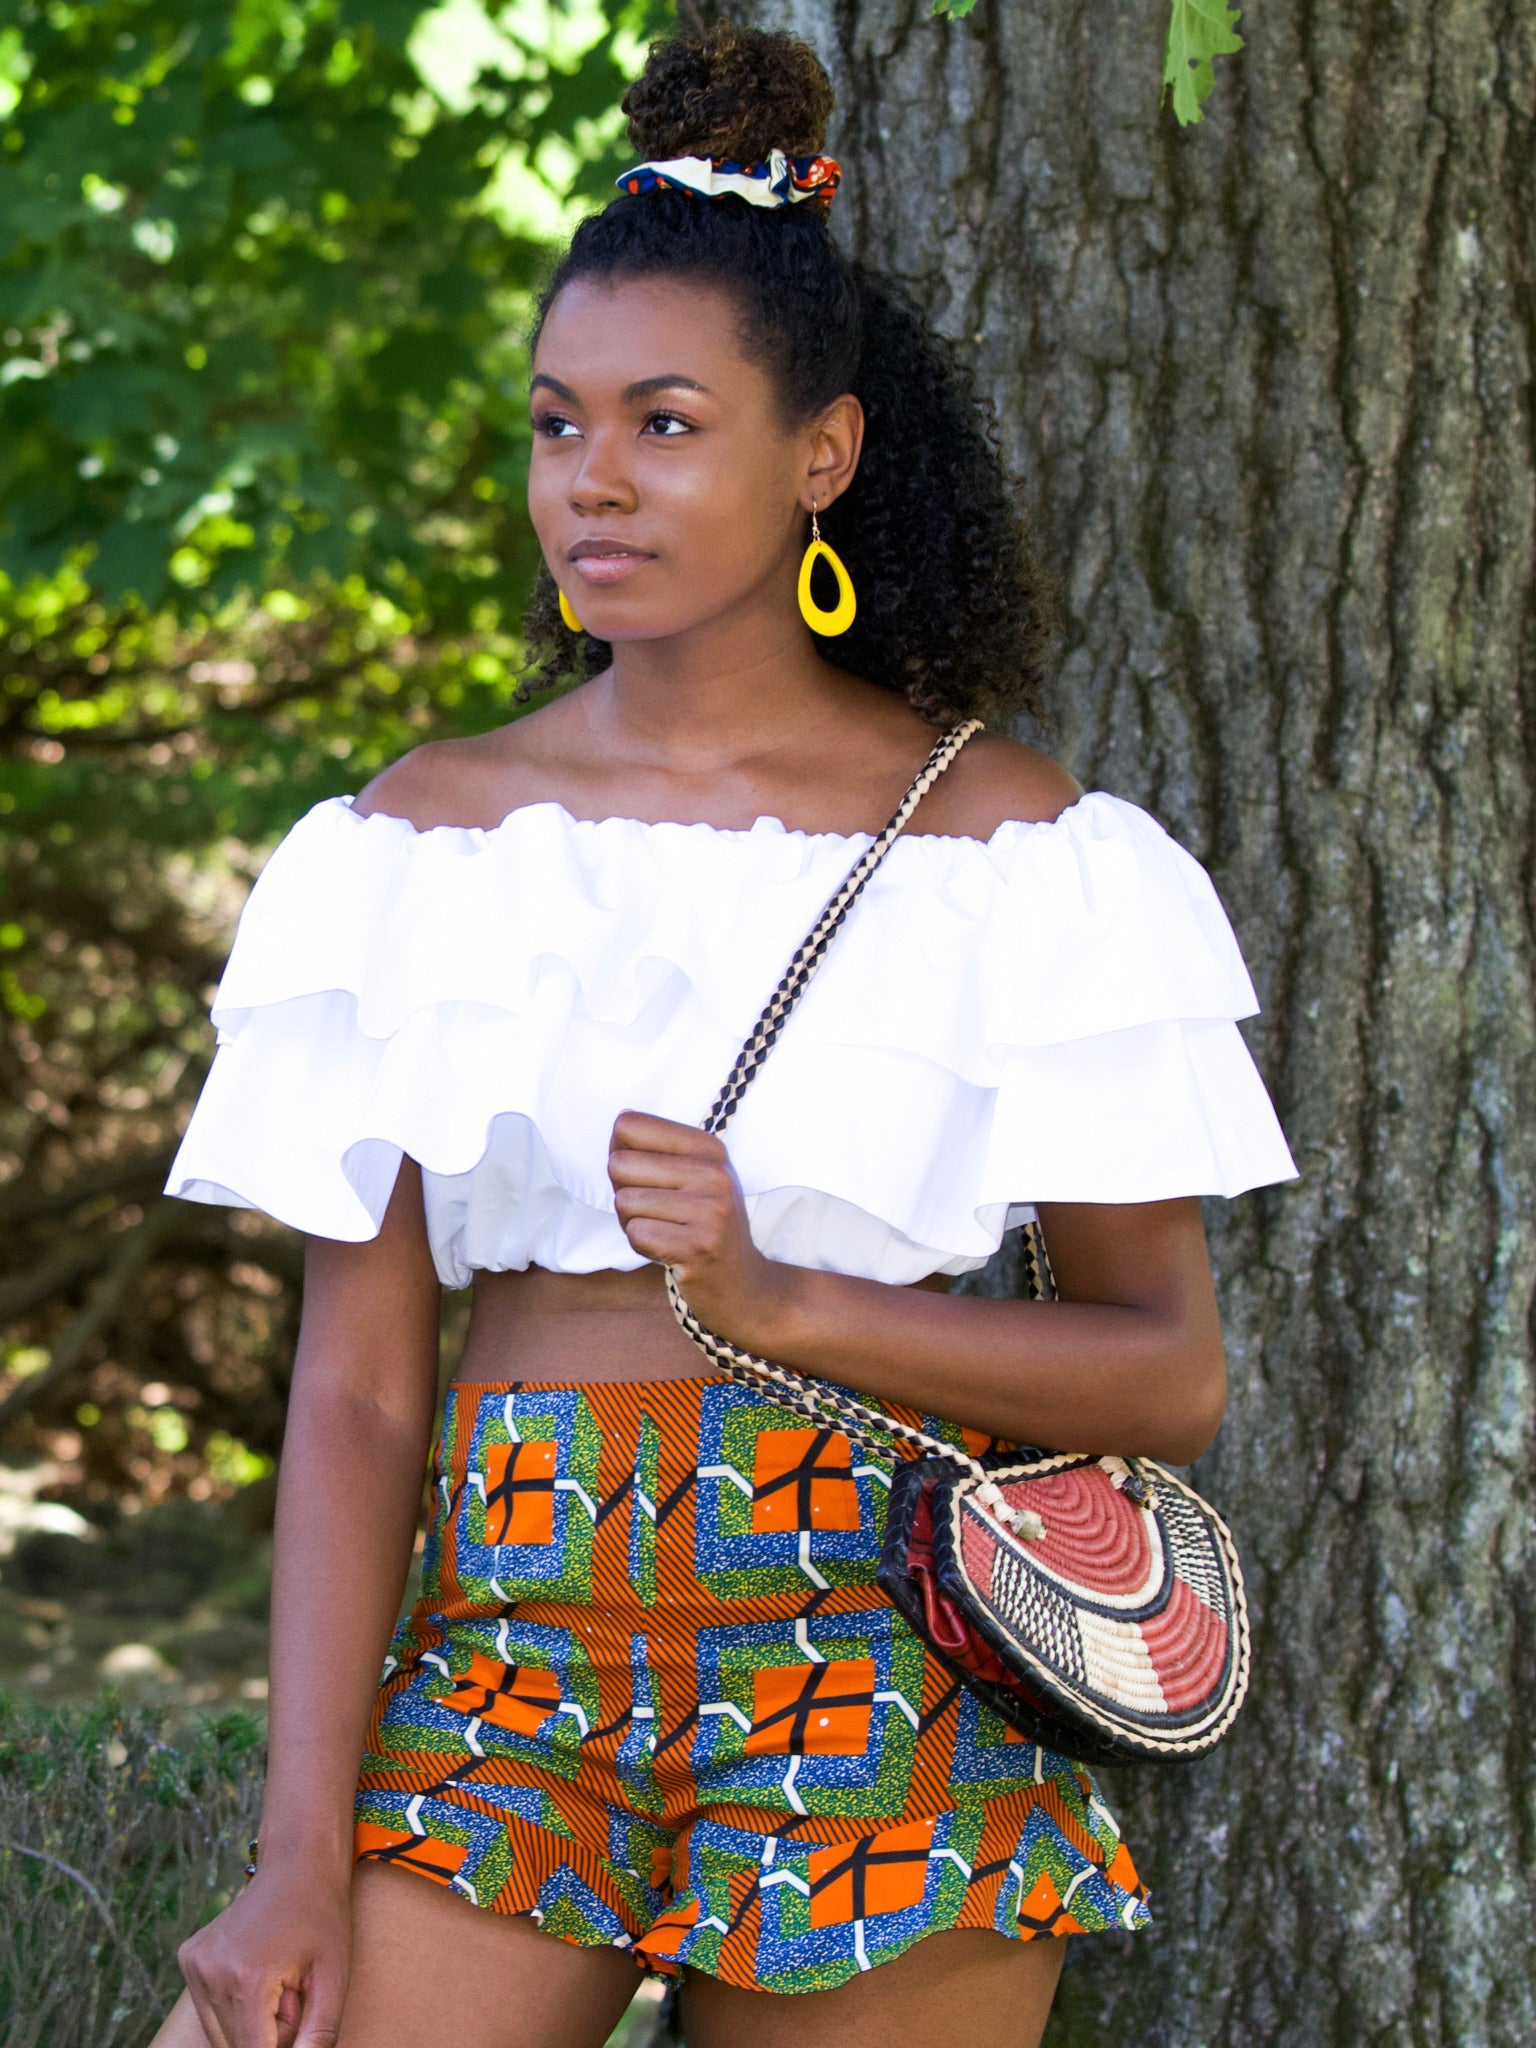 Black model wears high waist shorts with frilled hem. Patter on shorts is a mixture of stripes and squares in orange, black, white, blue and green colours.